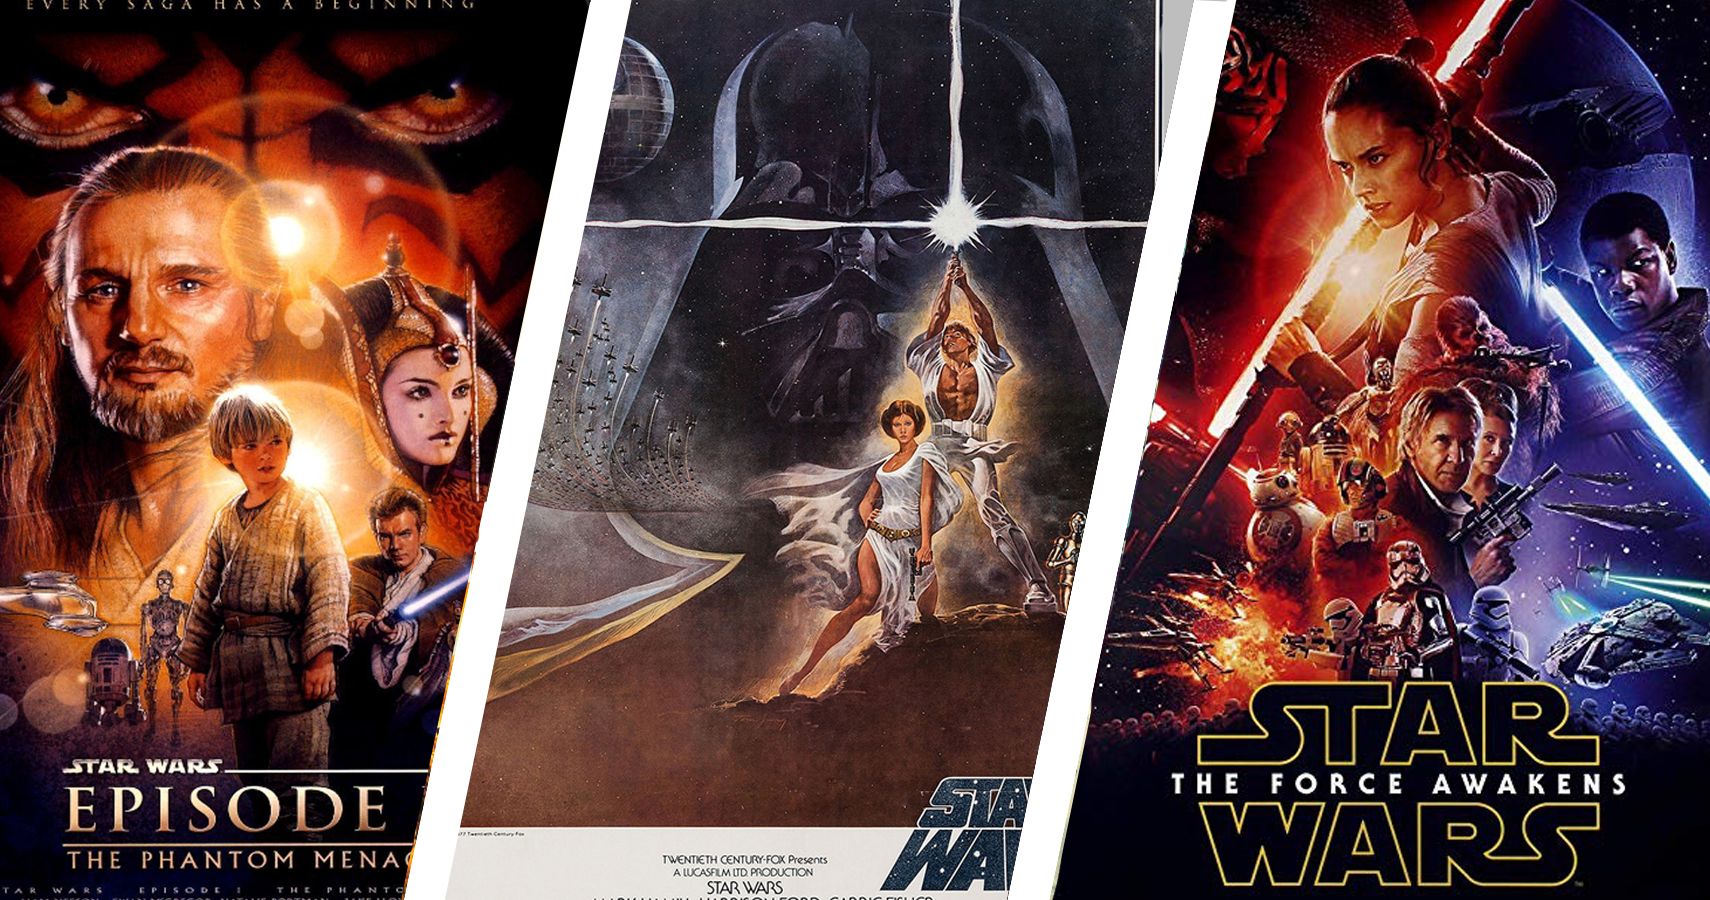 Star Wars 5 Of The Greatest Scenes From The Skywalker Saga (& 5 Of The Worst)